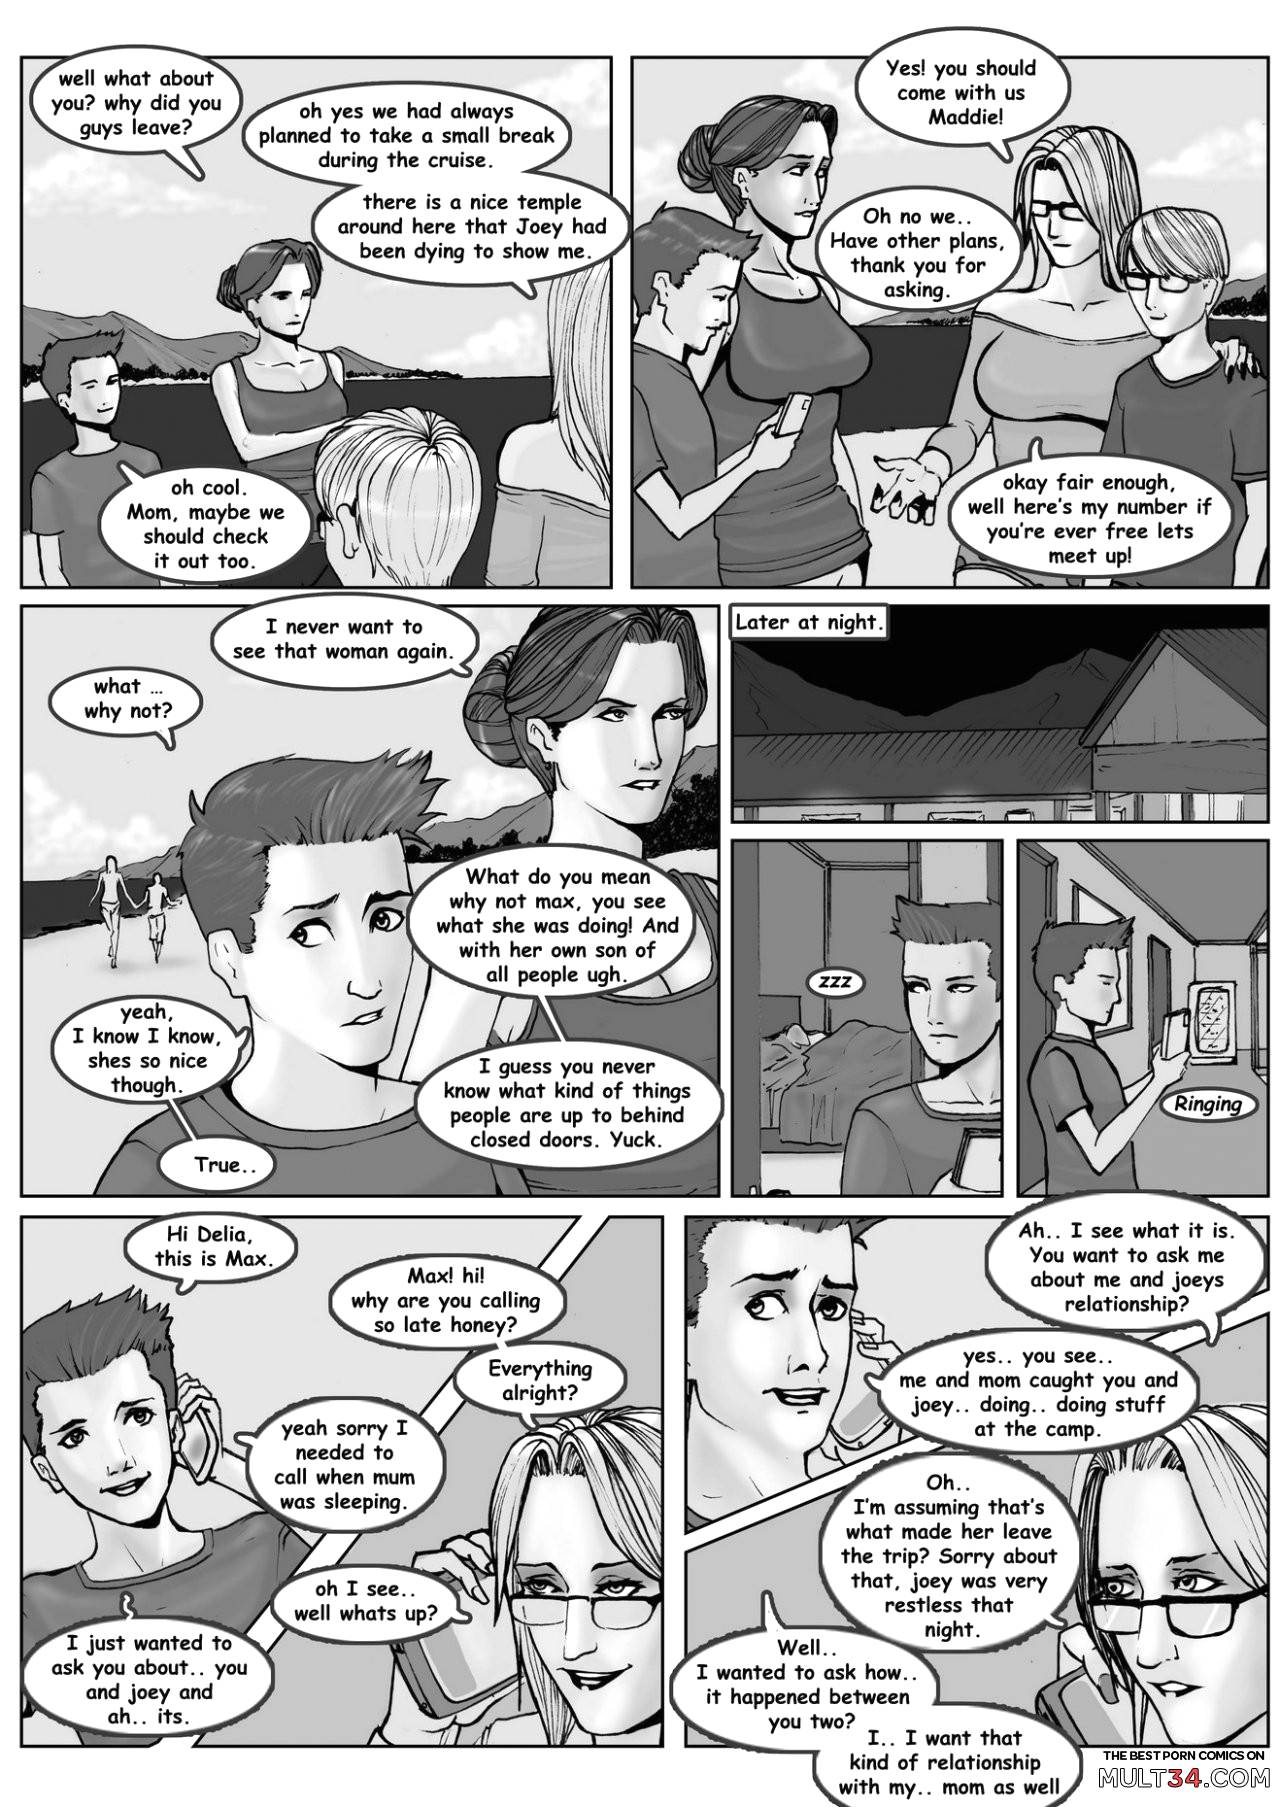 Max and Maddie's Island Quest: Part 1: Jocasta page 20